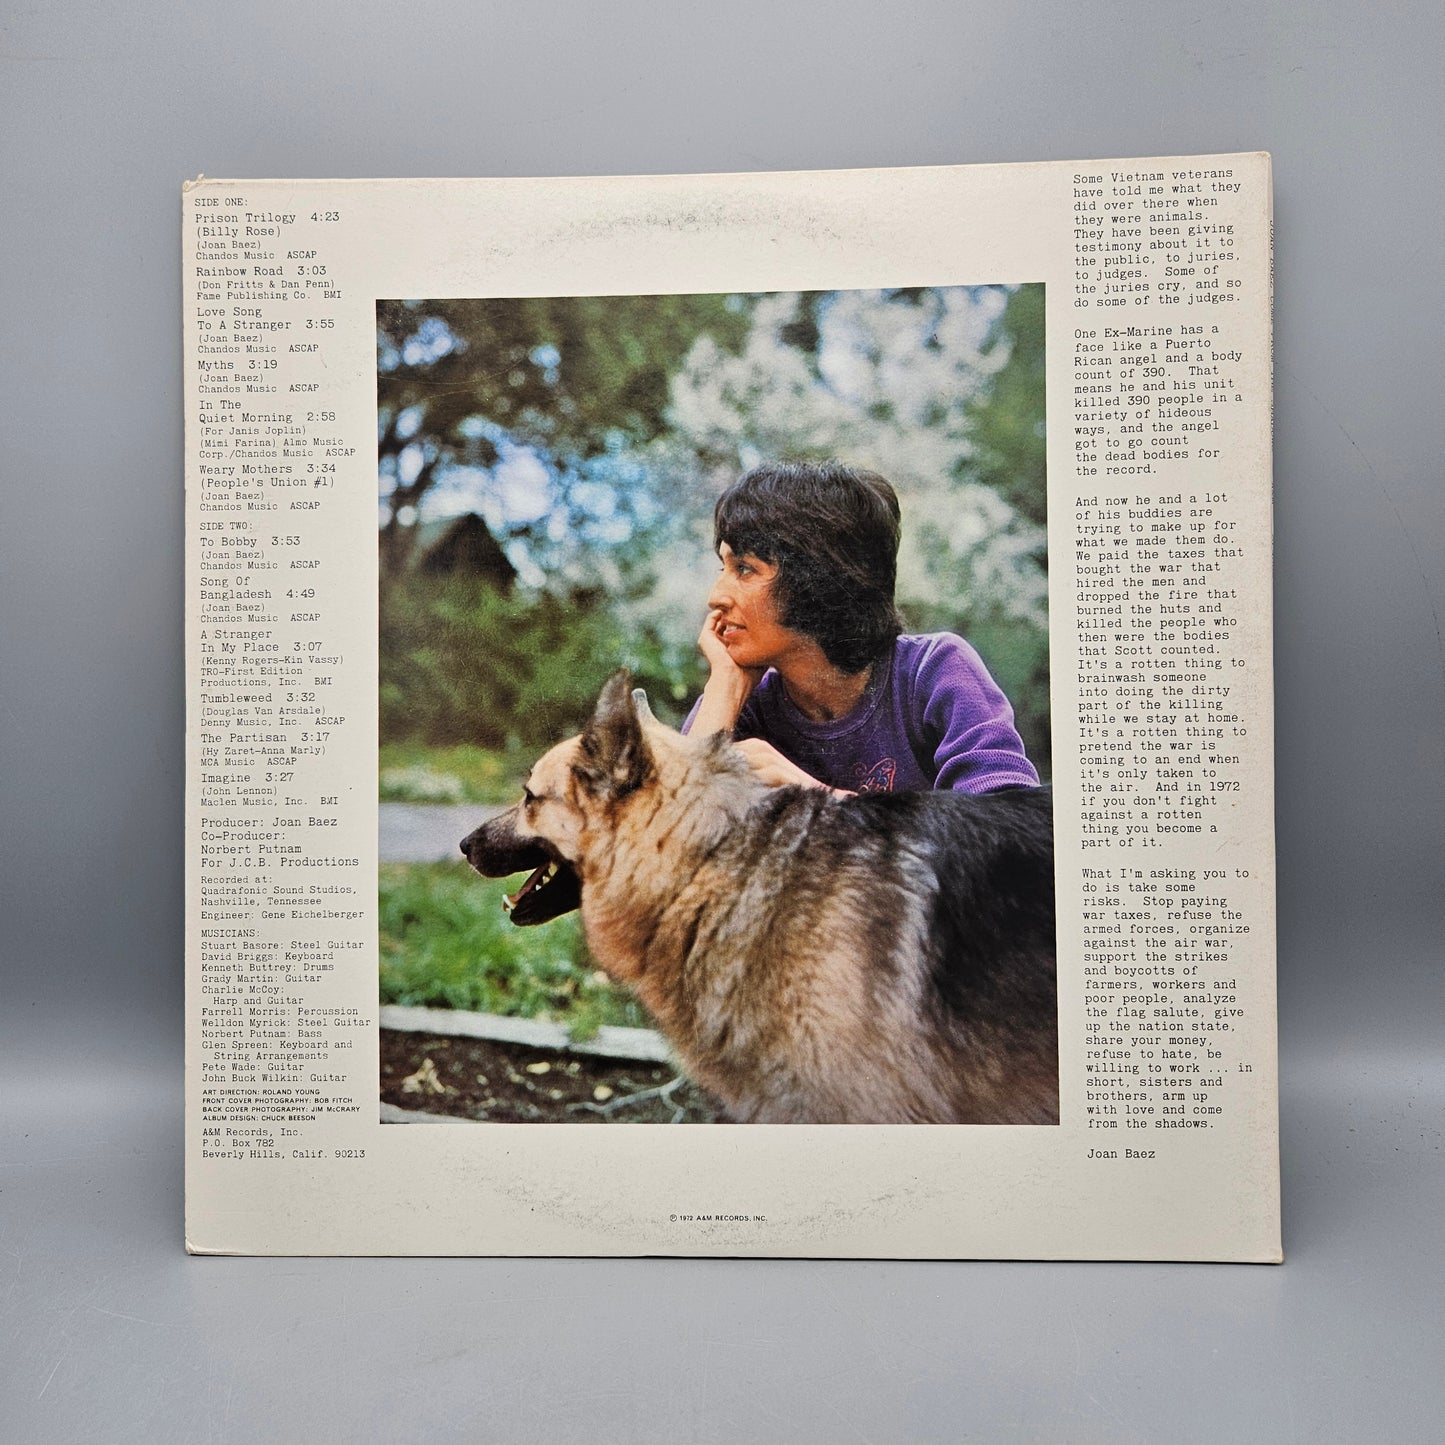 1972 Joan Baez Come from the Shadows LP Record